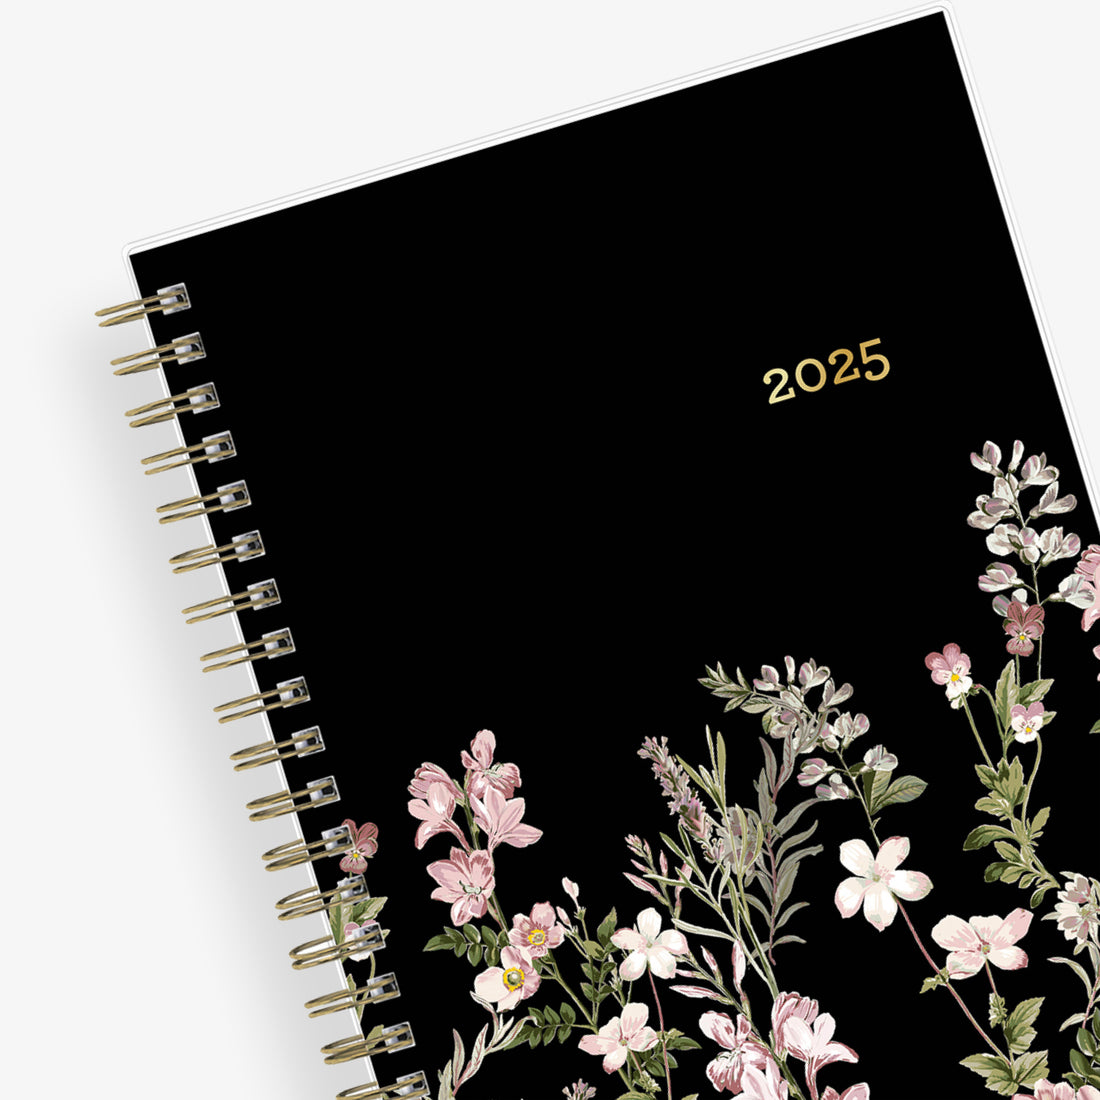 January 2025 - December 2025 monthly planner from Blue Sky features beautiful floral cover design with black background and gold binding 5x8